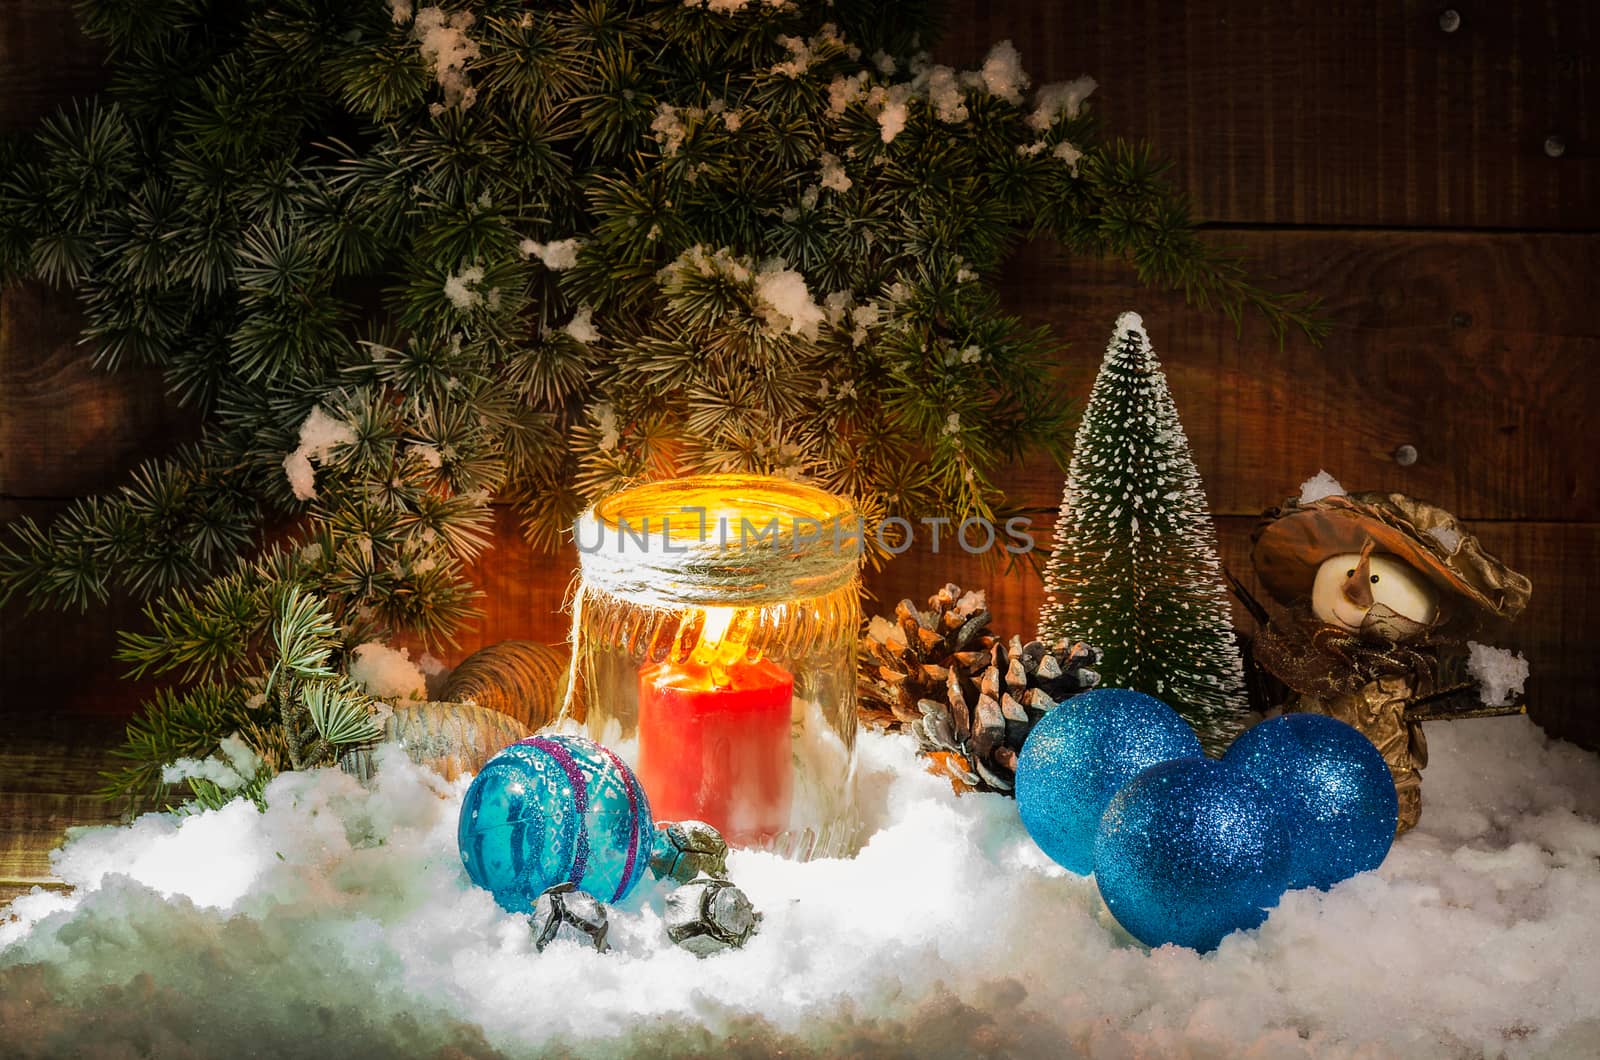 still life with festively decorated home interior with Christmas tree